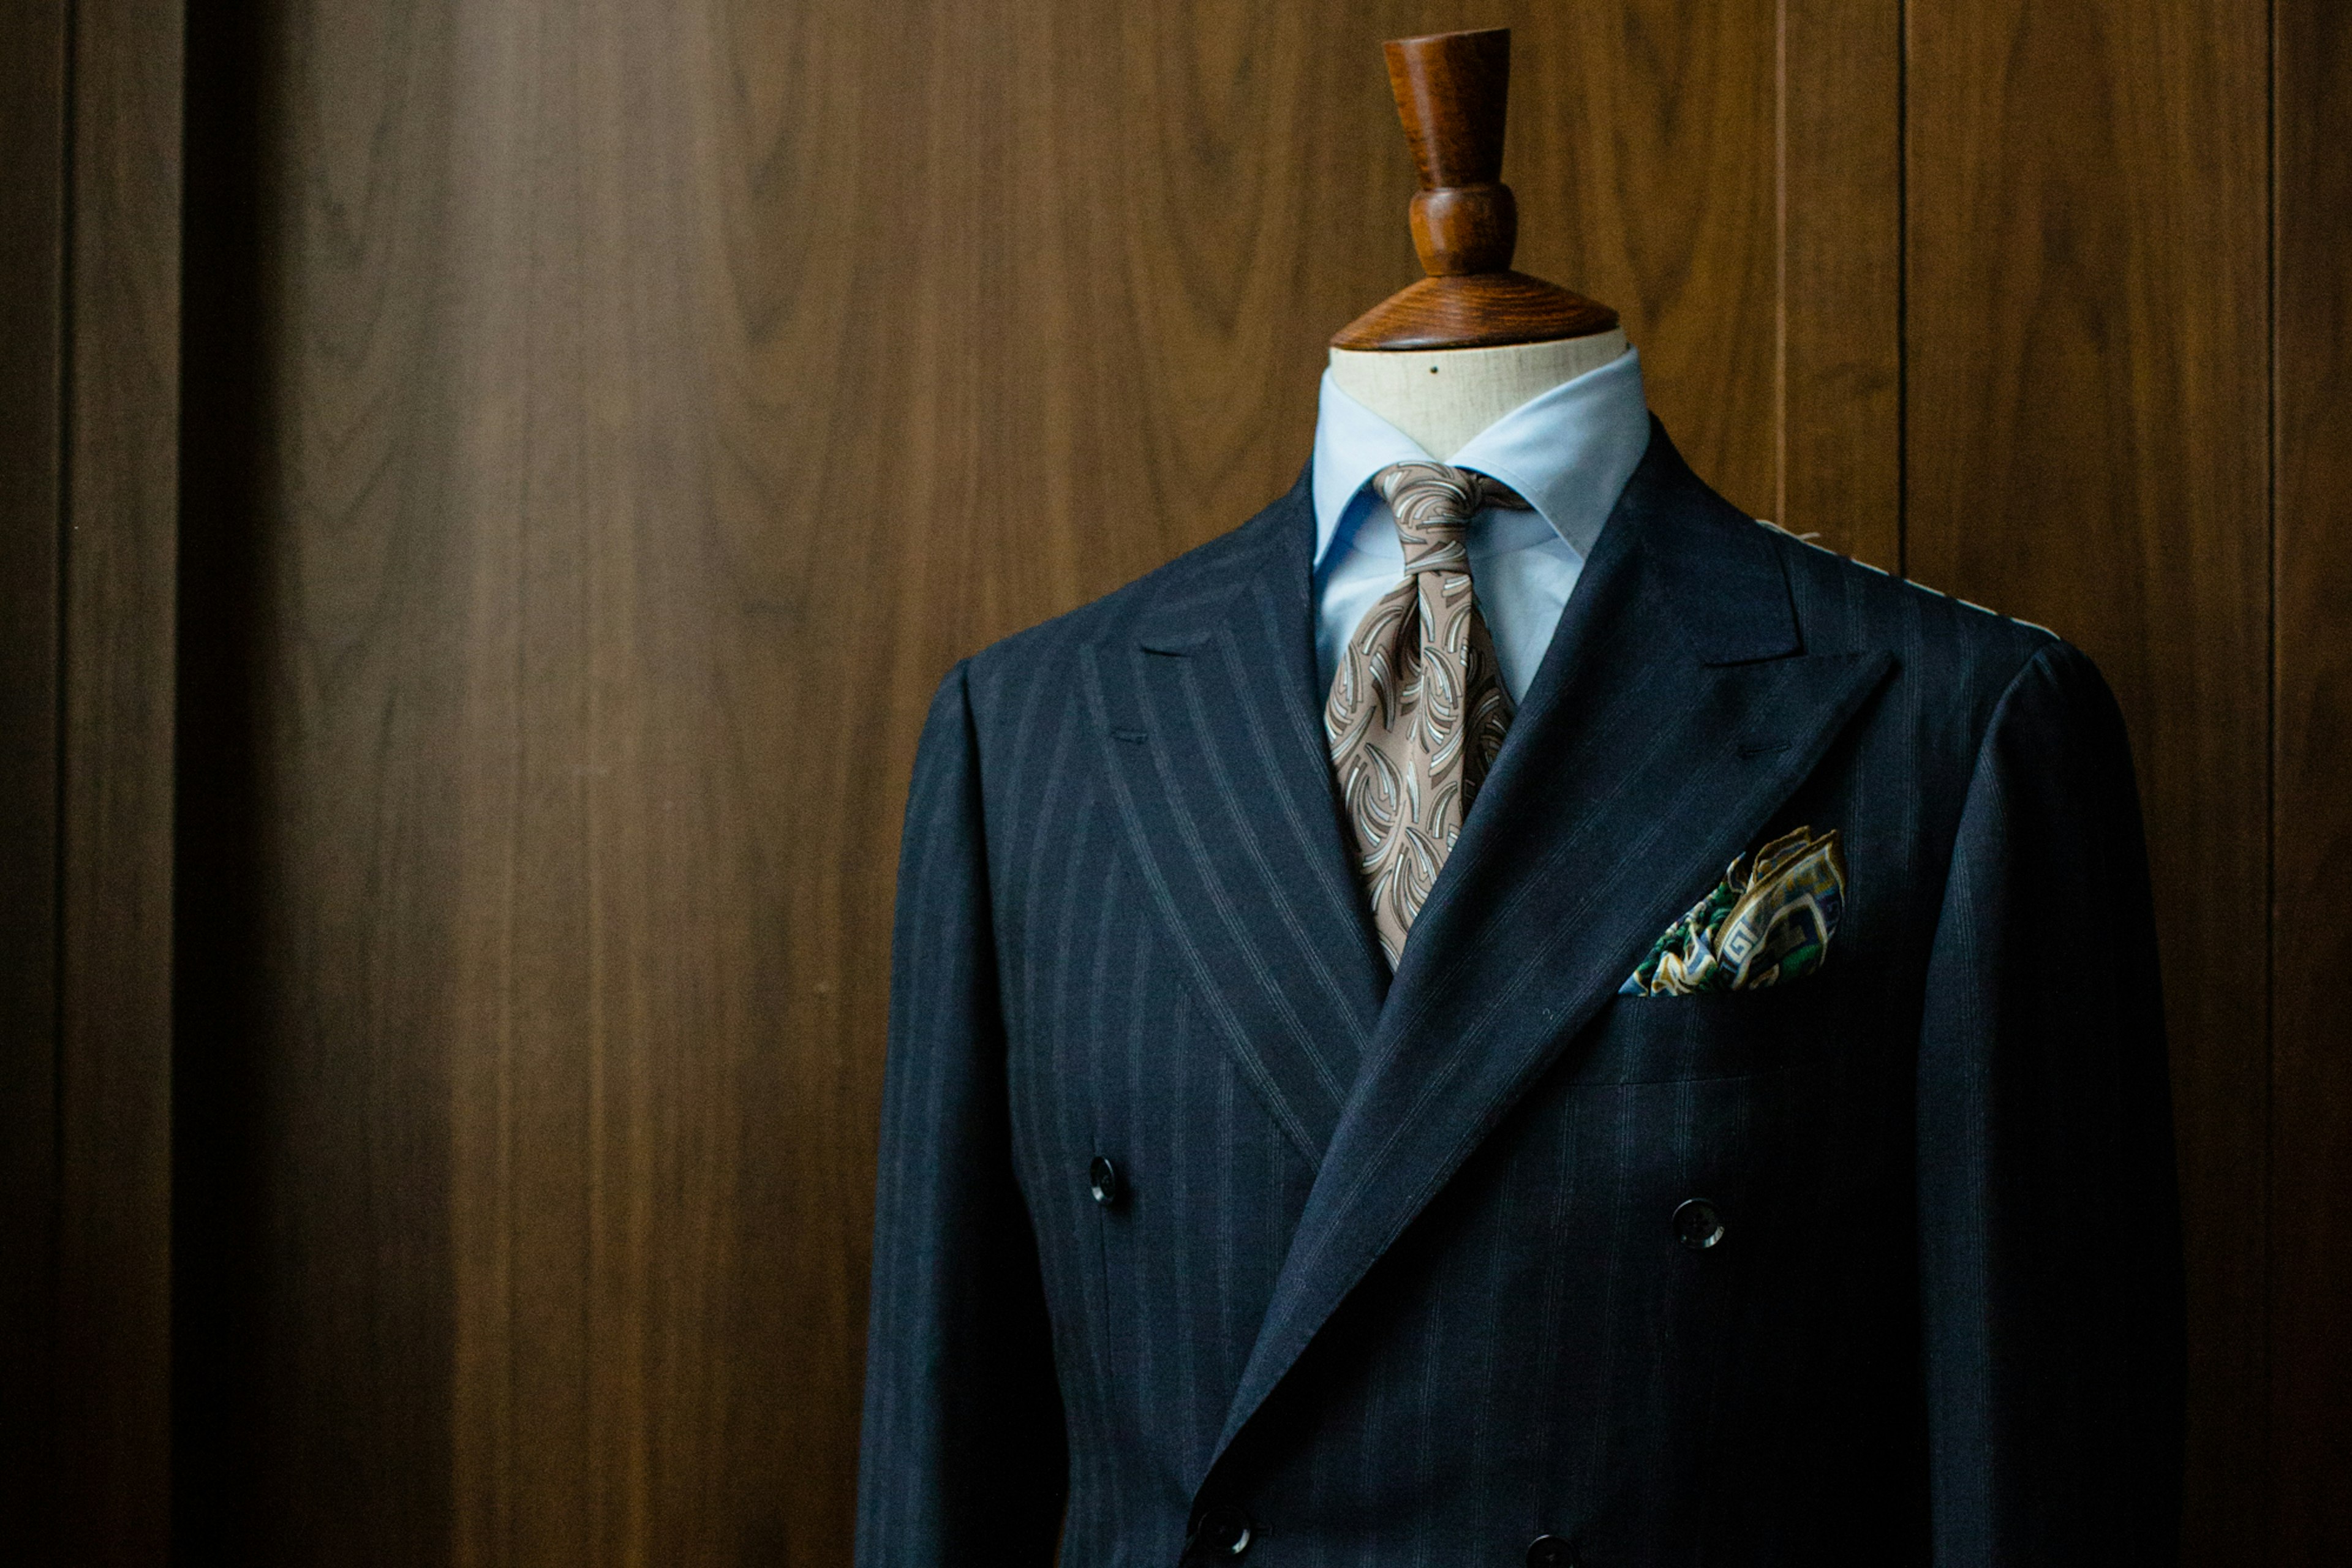 The Armoury by Ring Jacket